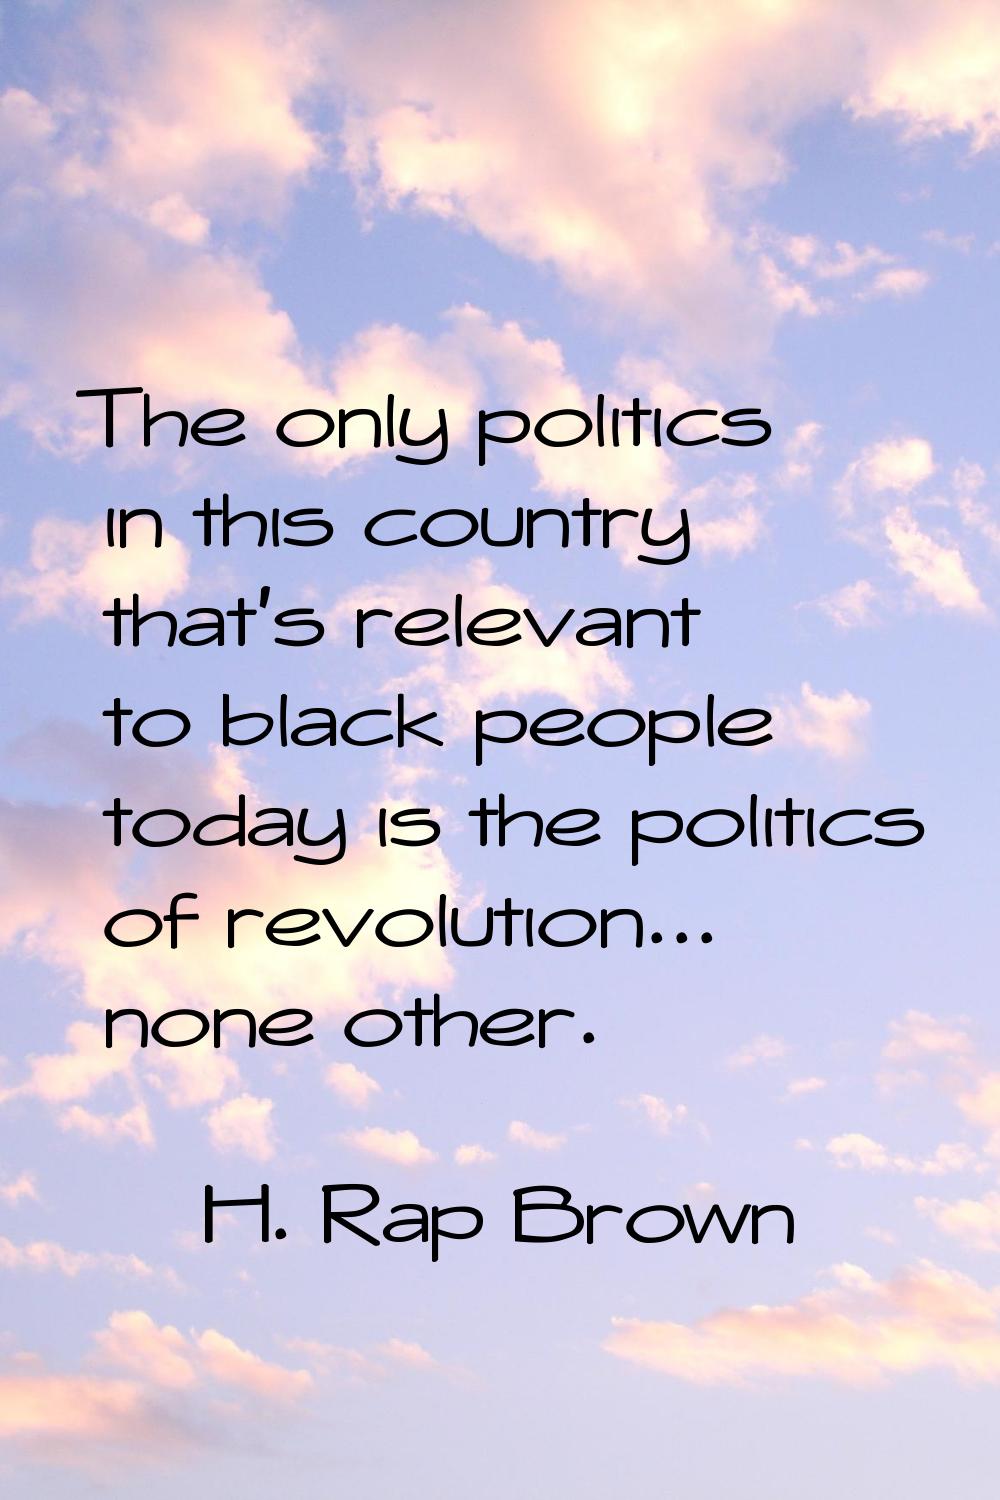 The only politics in this country that's relevant to black people today is the politics of revoluti